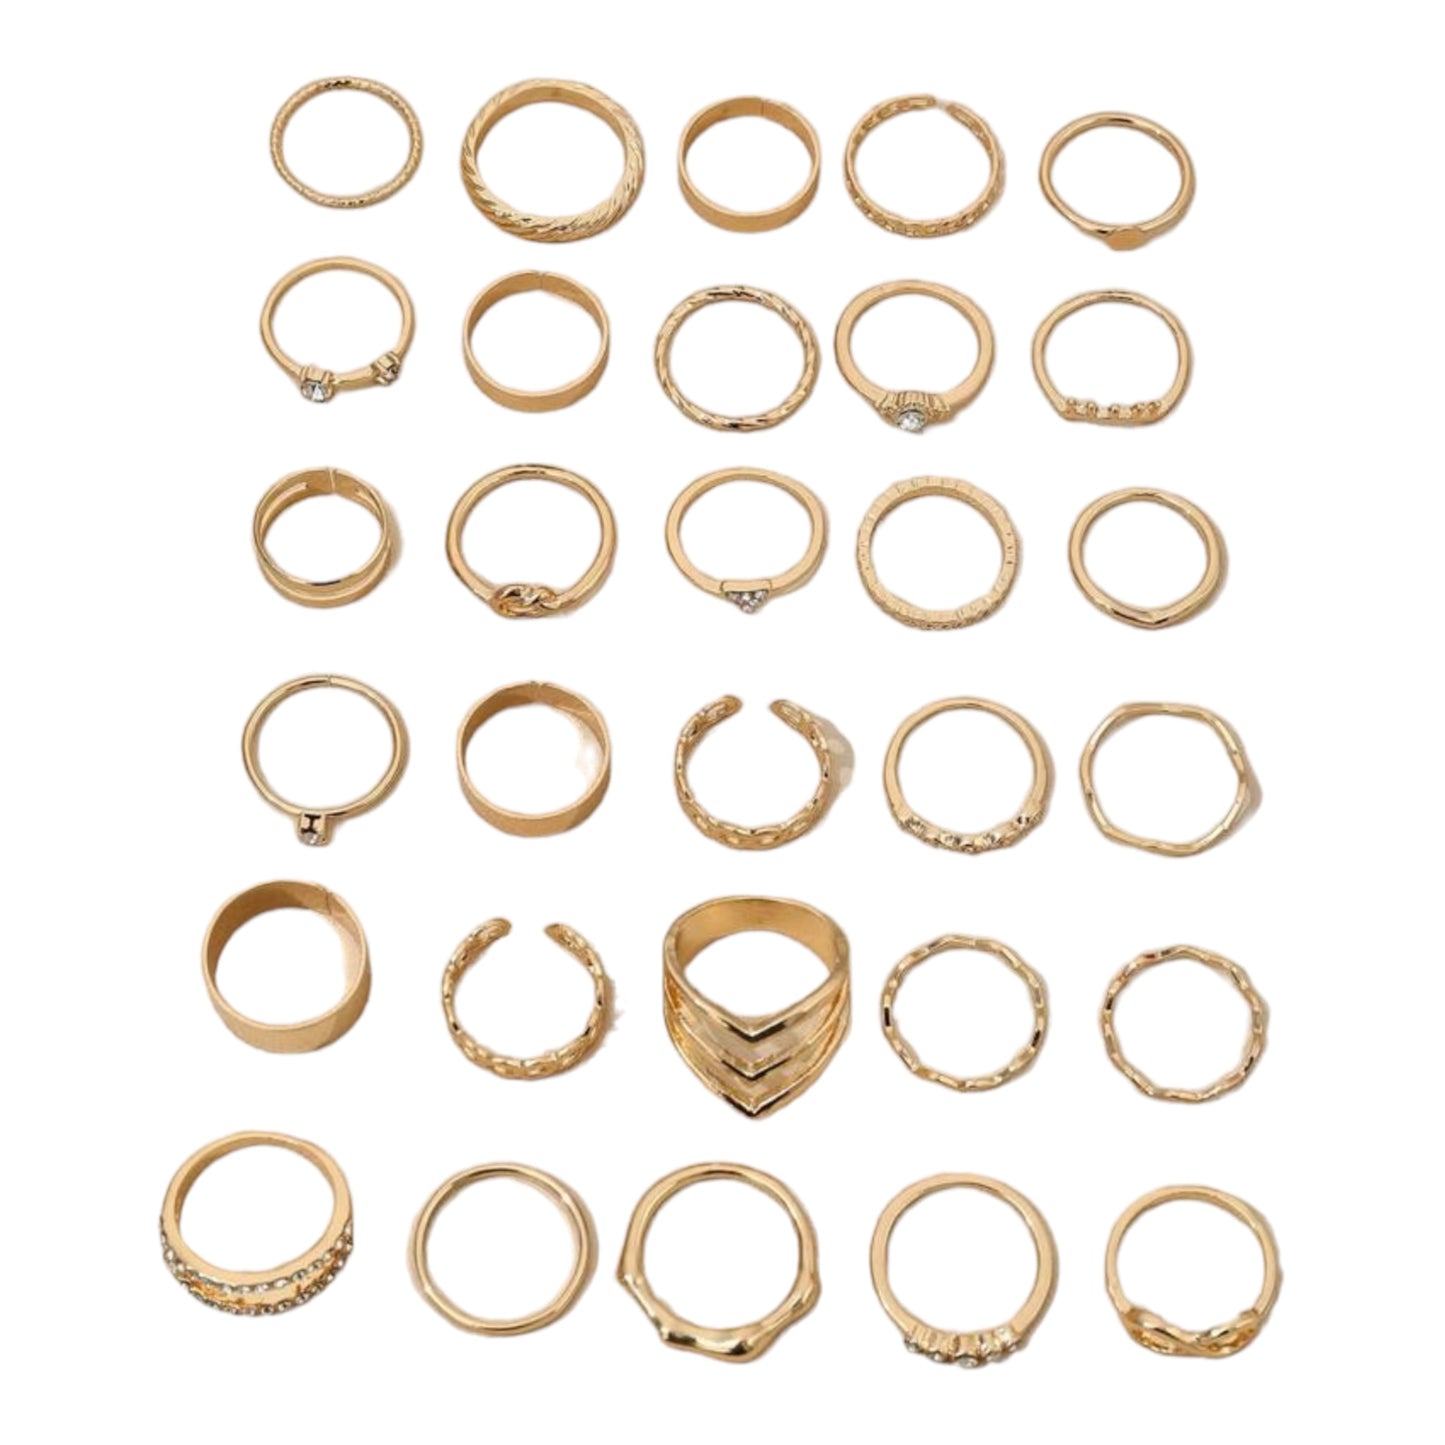 Kinky Pleasure - S019 - Ring Collection Set Gold Or Silver - 30 Pieces